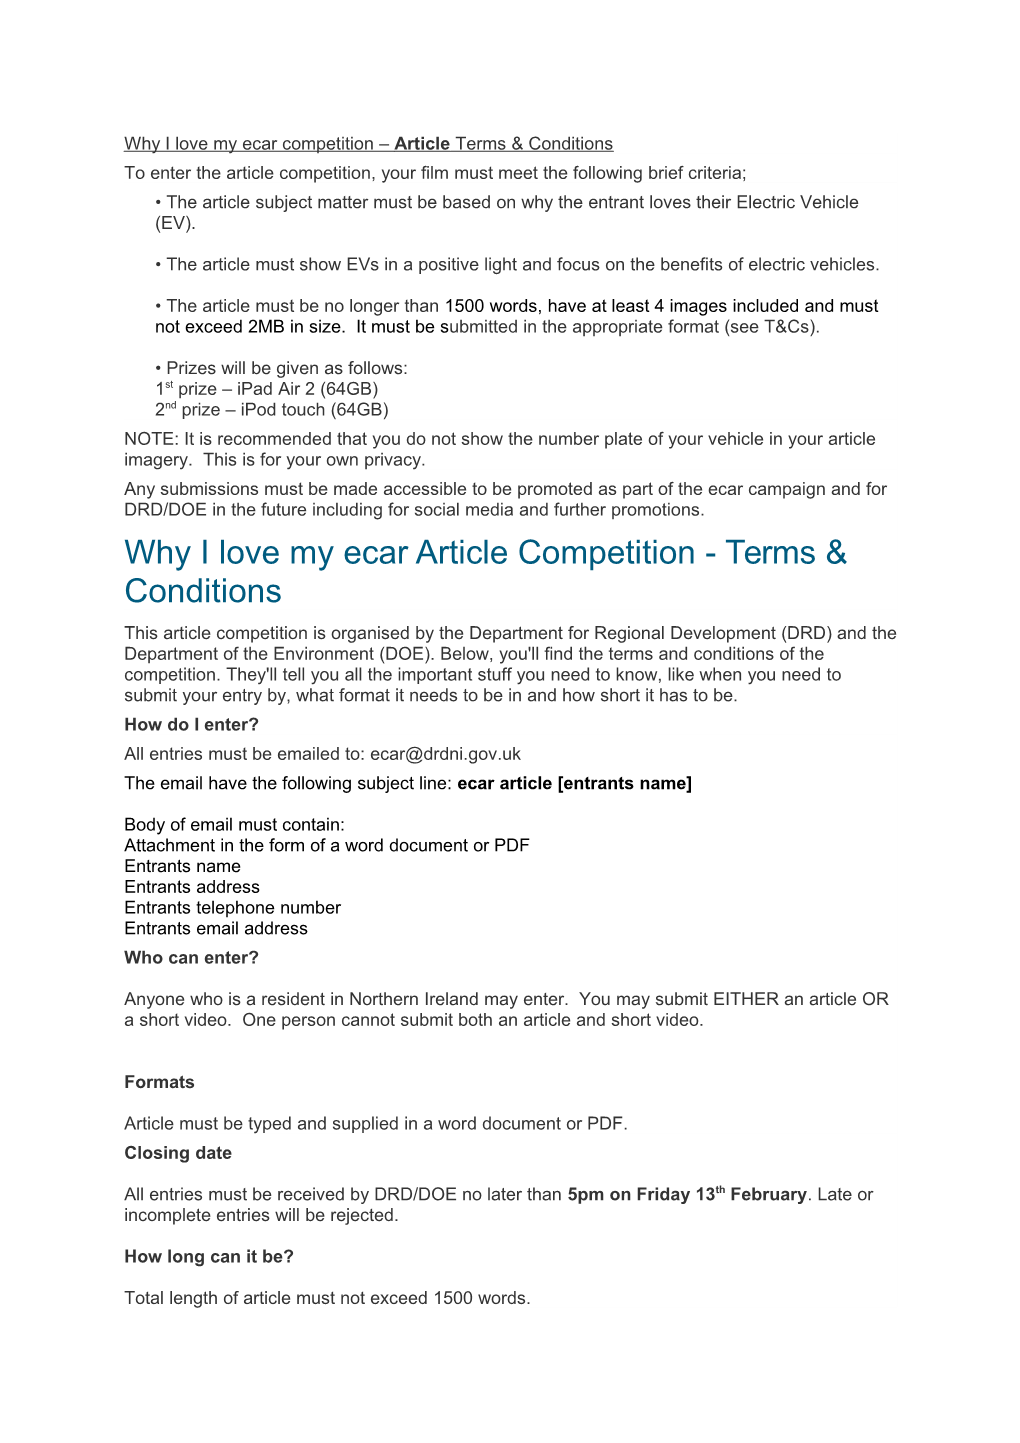 Why I Love My Ecar Competition Article Terms & Conditions